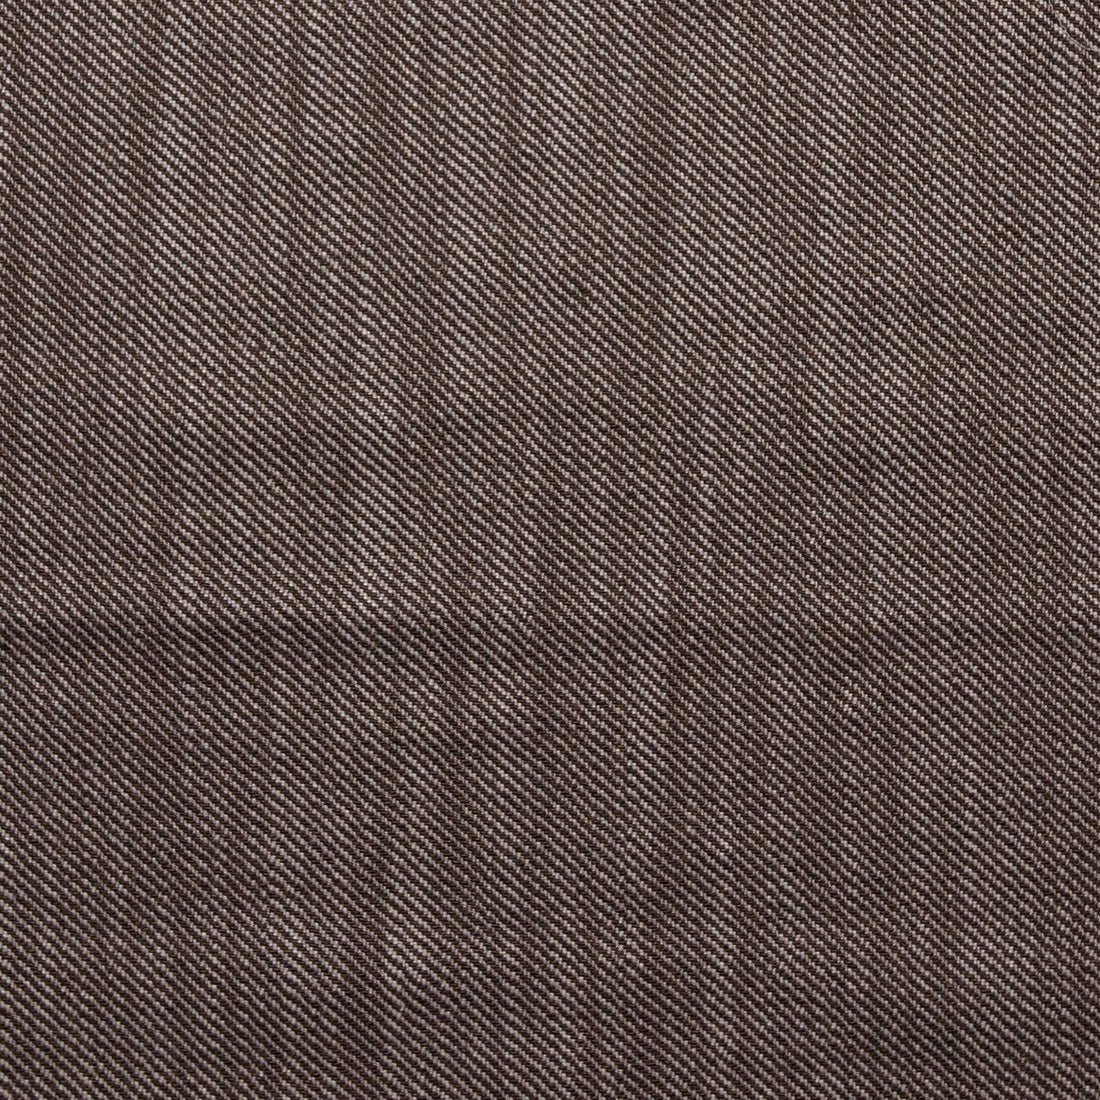 Victoria fabric in marron color - pattern GDT5388.6.0 - by Gaston y Daniela in the Gaston Africalia collection